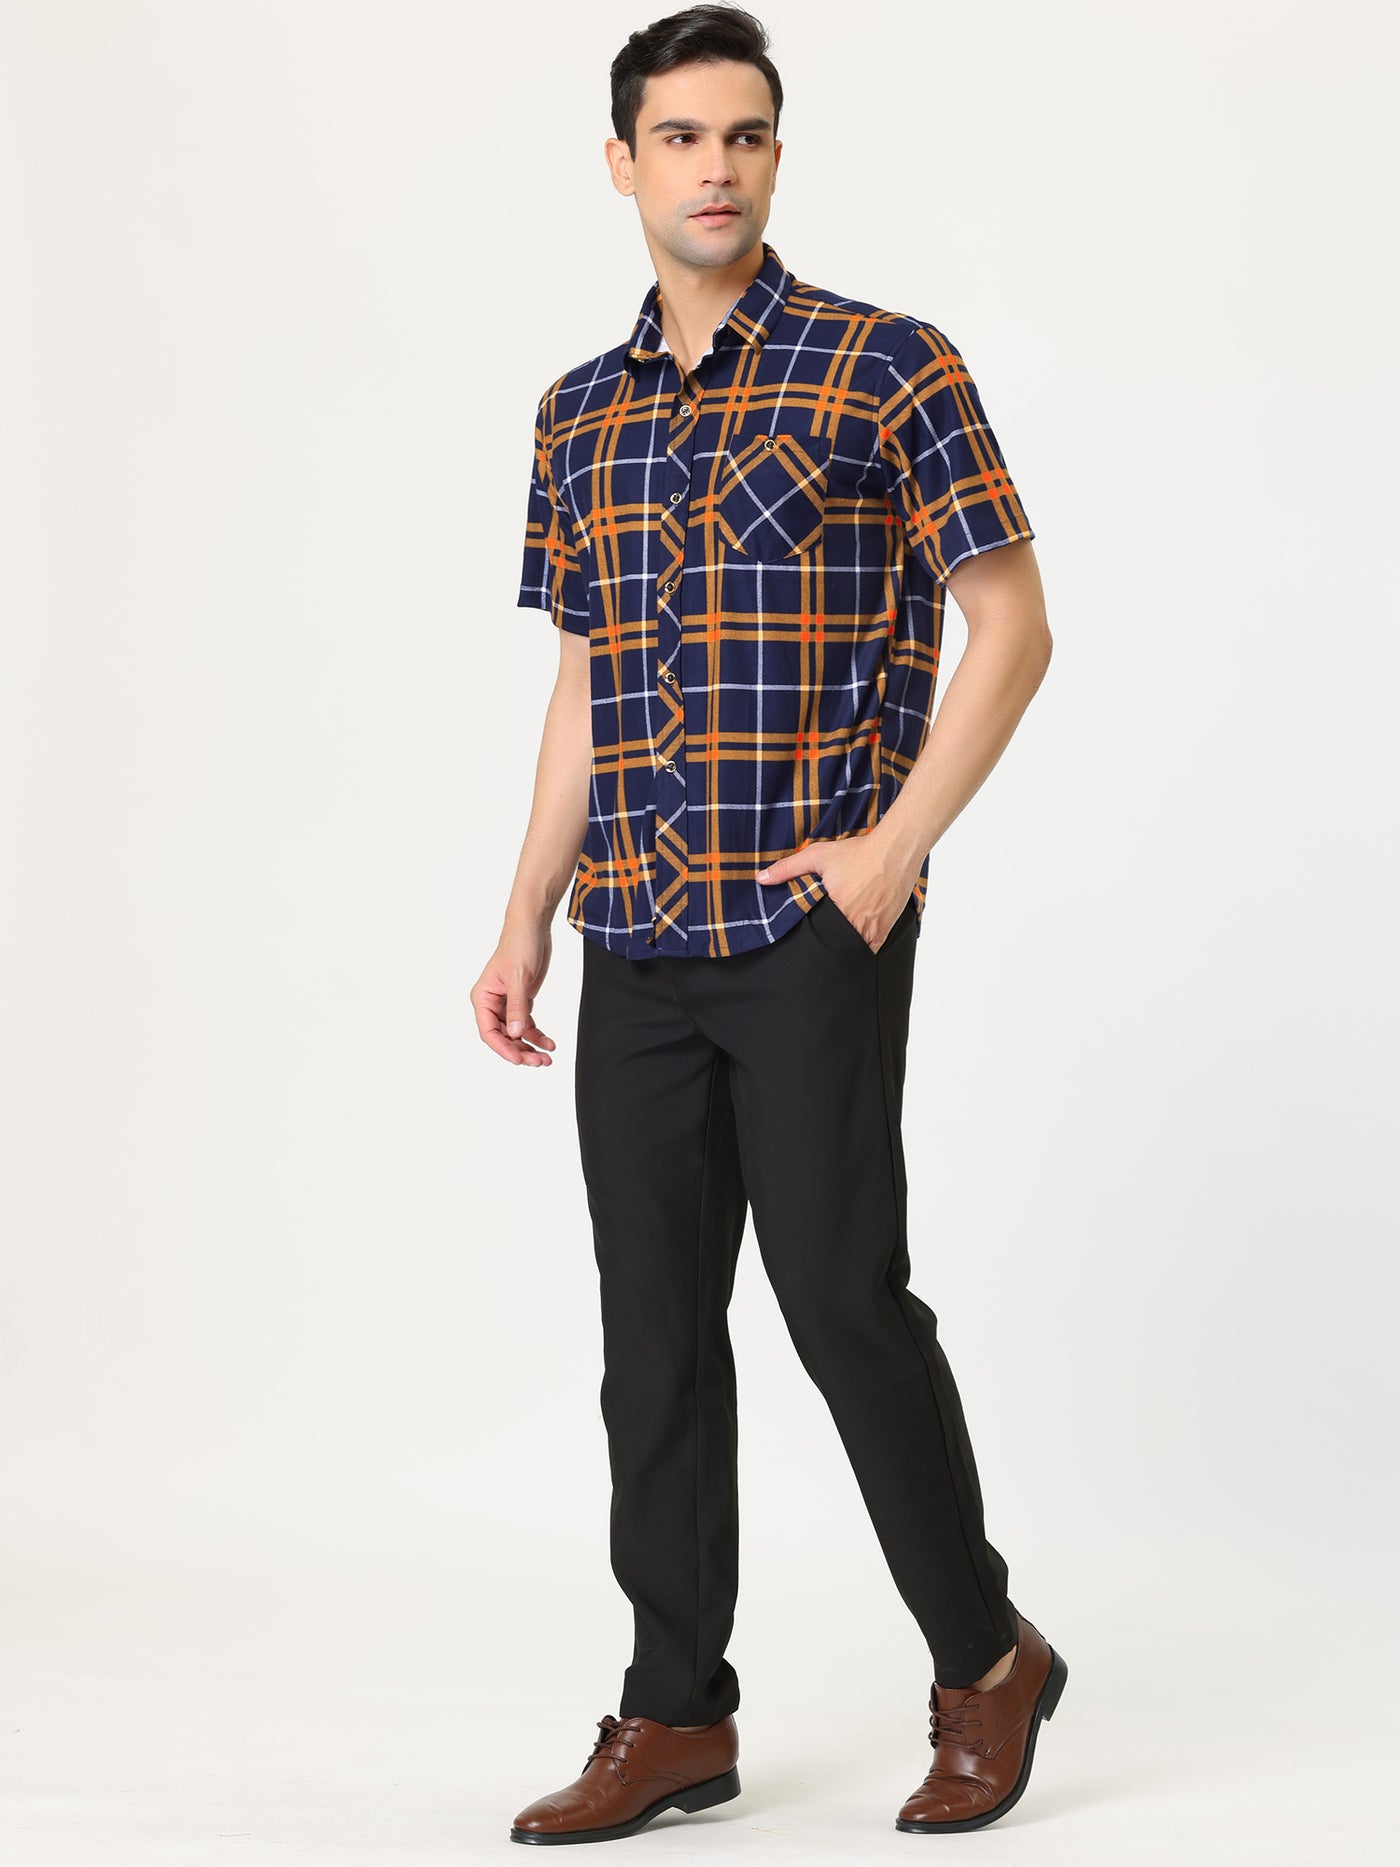 Bublédon Men's Plaid Shirt Short Sleeves Casual Contrast Color Button Down Checked Shirts